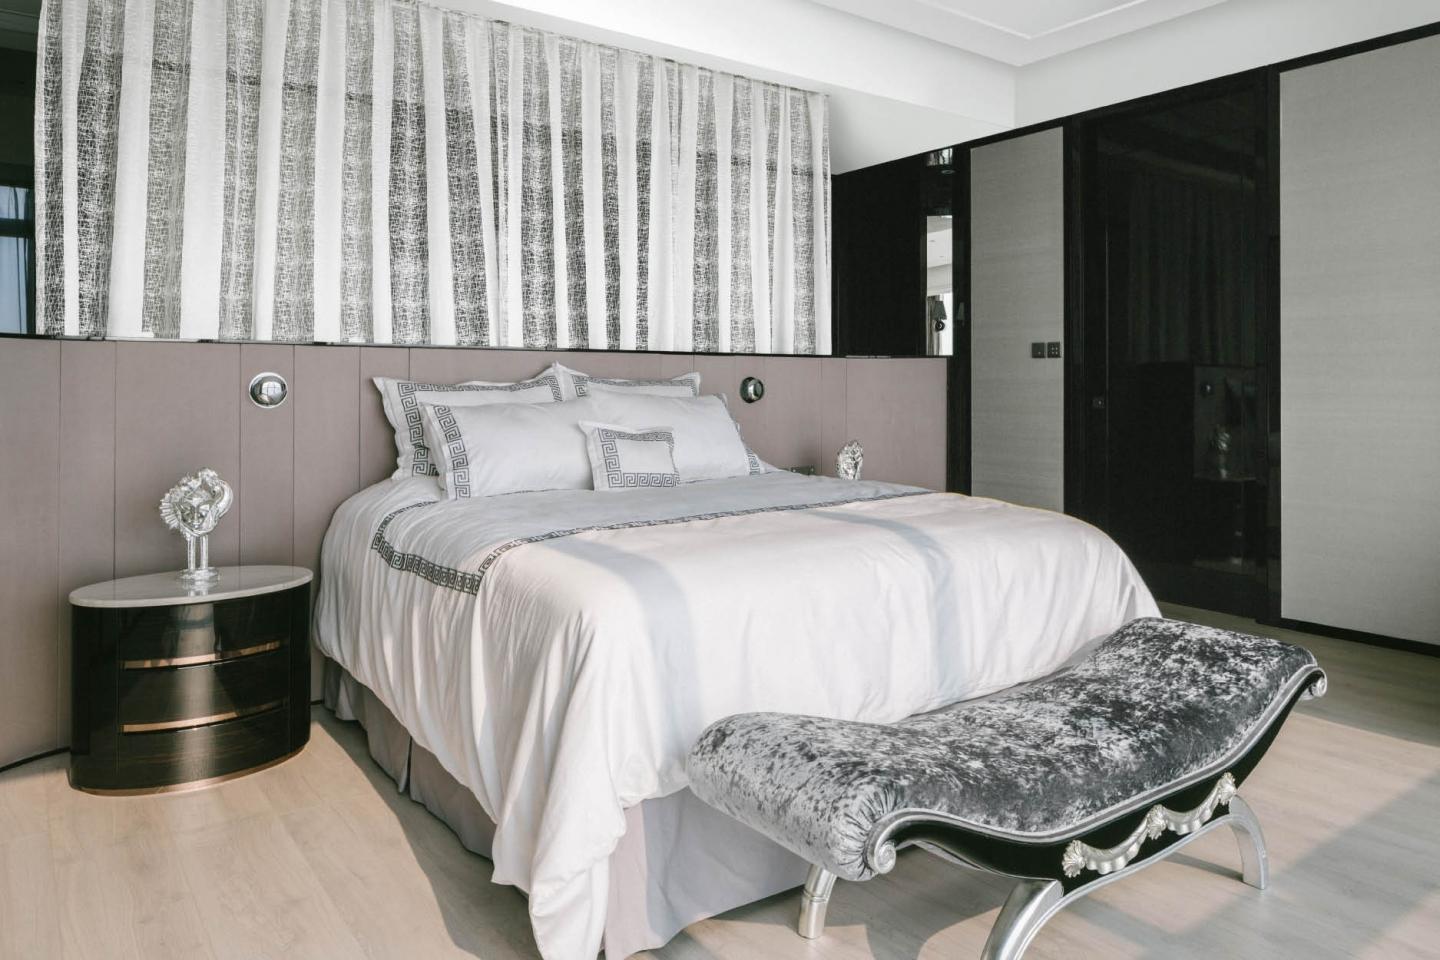 The three bedrooms  feature a similar layout, each coming with a  walk-in wardrobe and ensuite bathroom